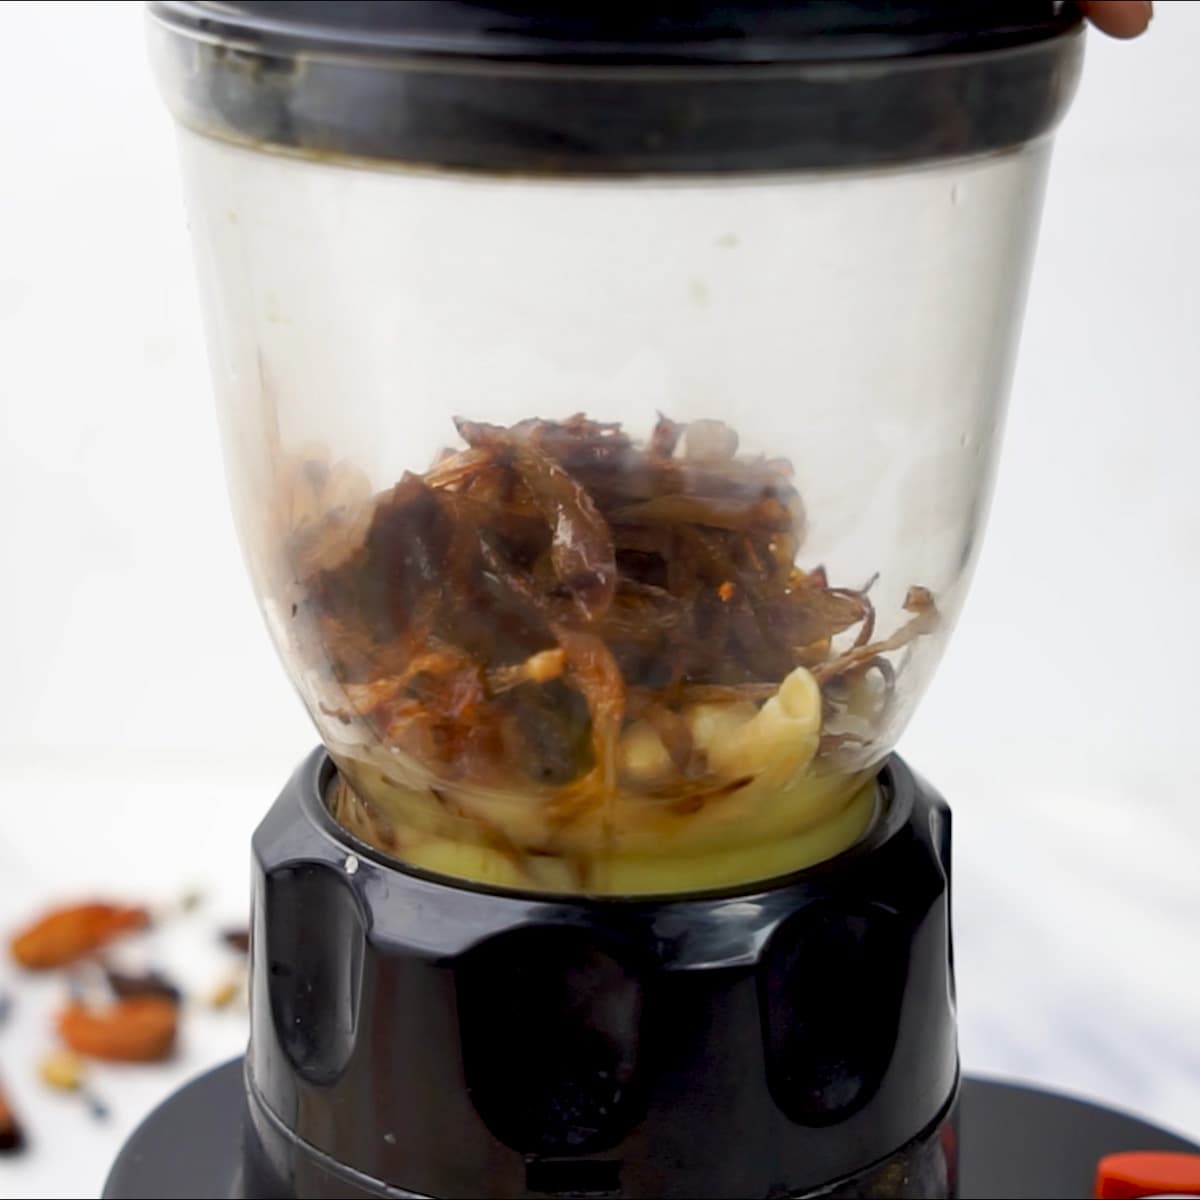 Blending fried onions and cashews together